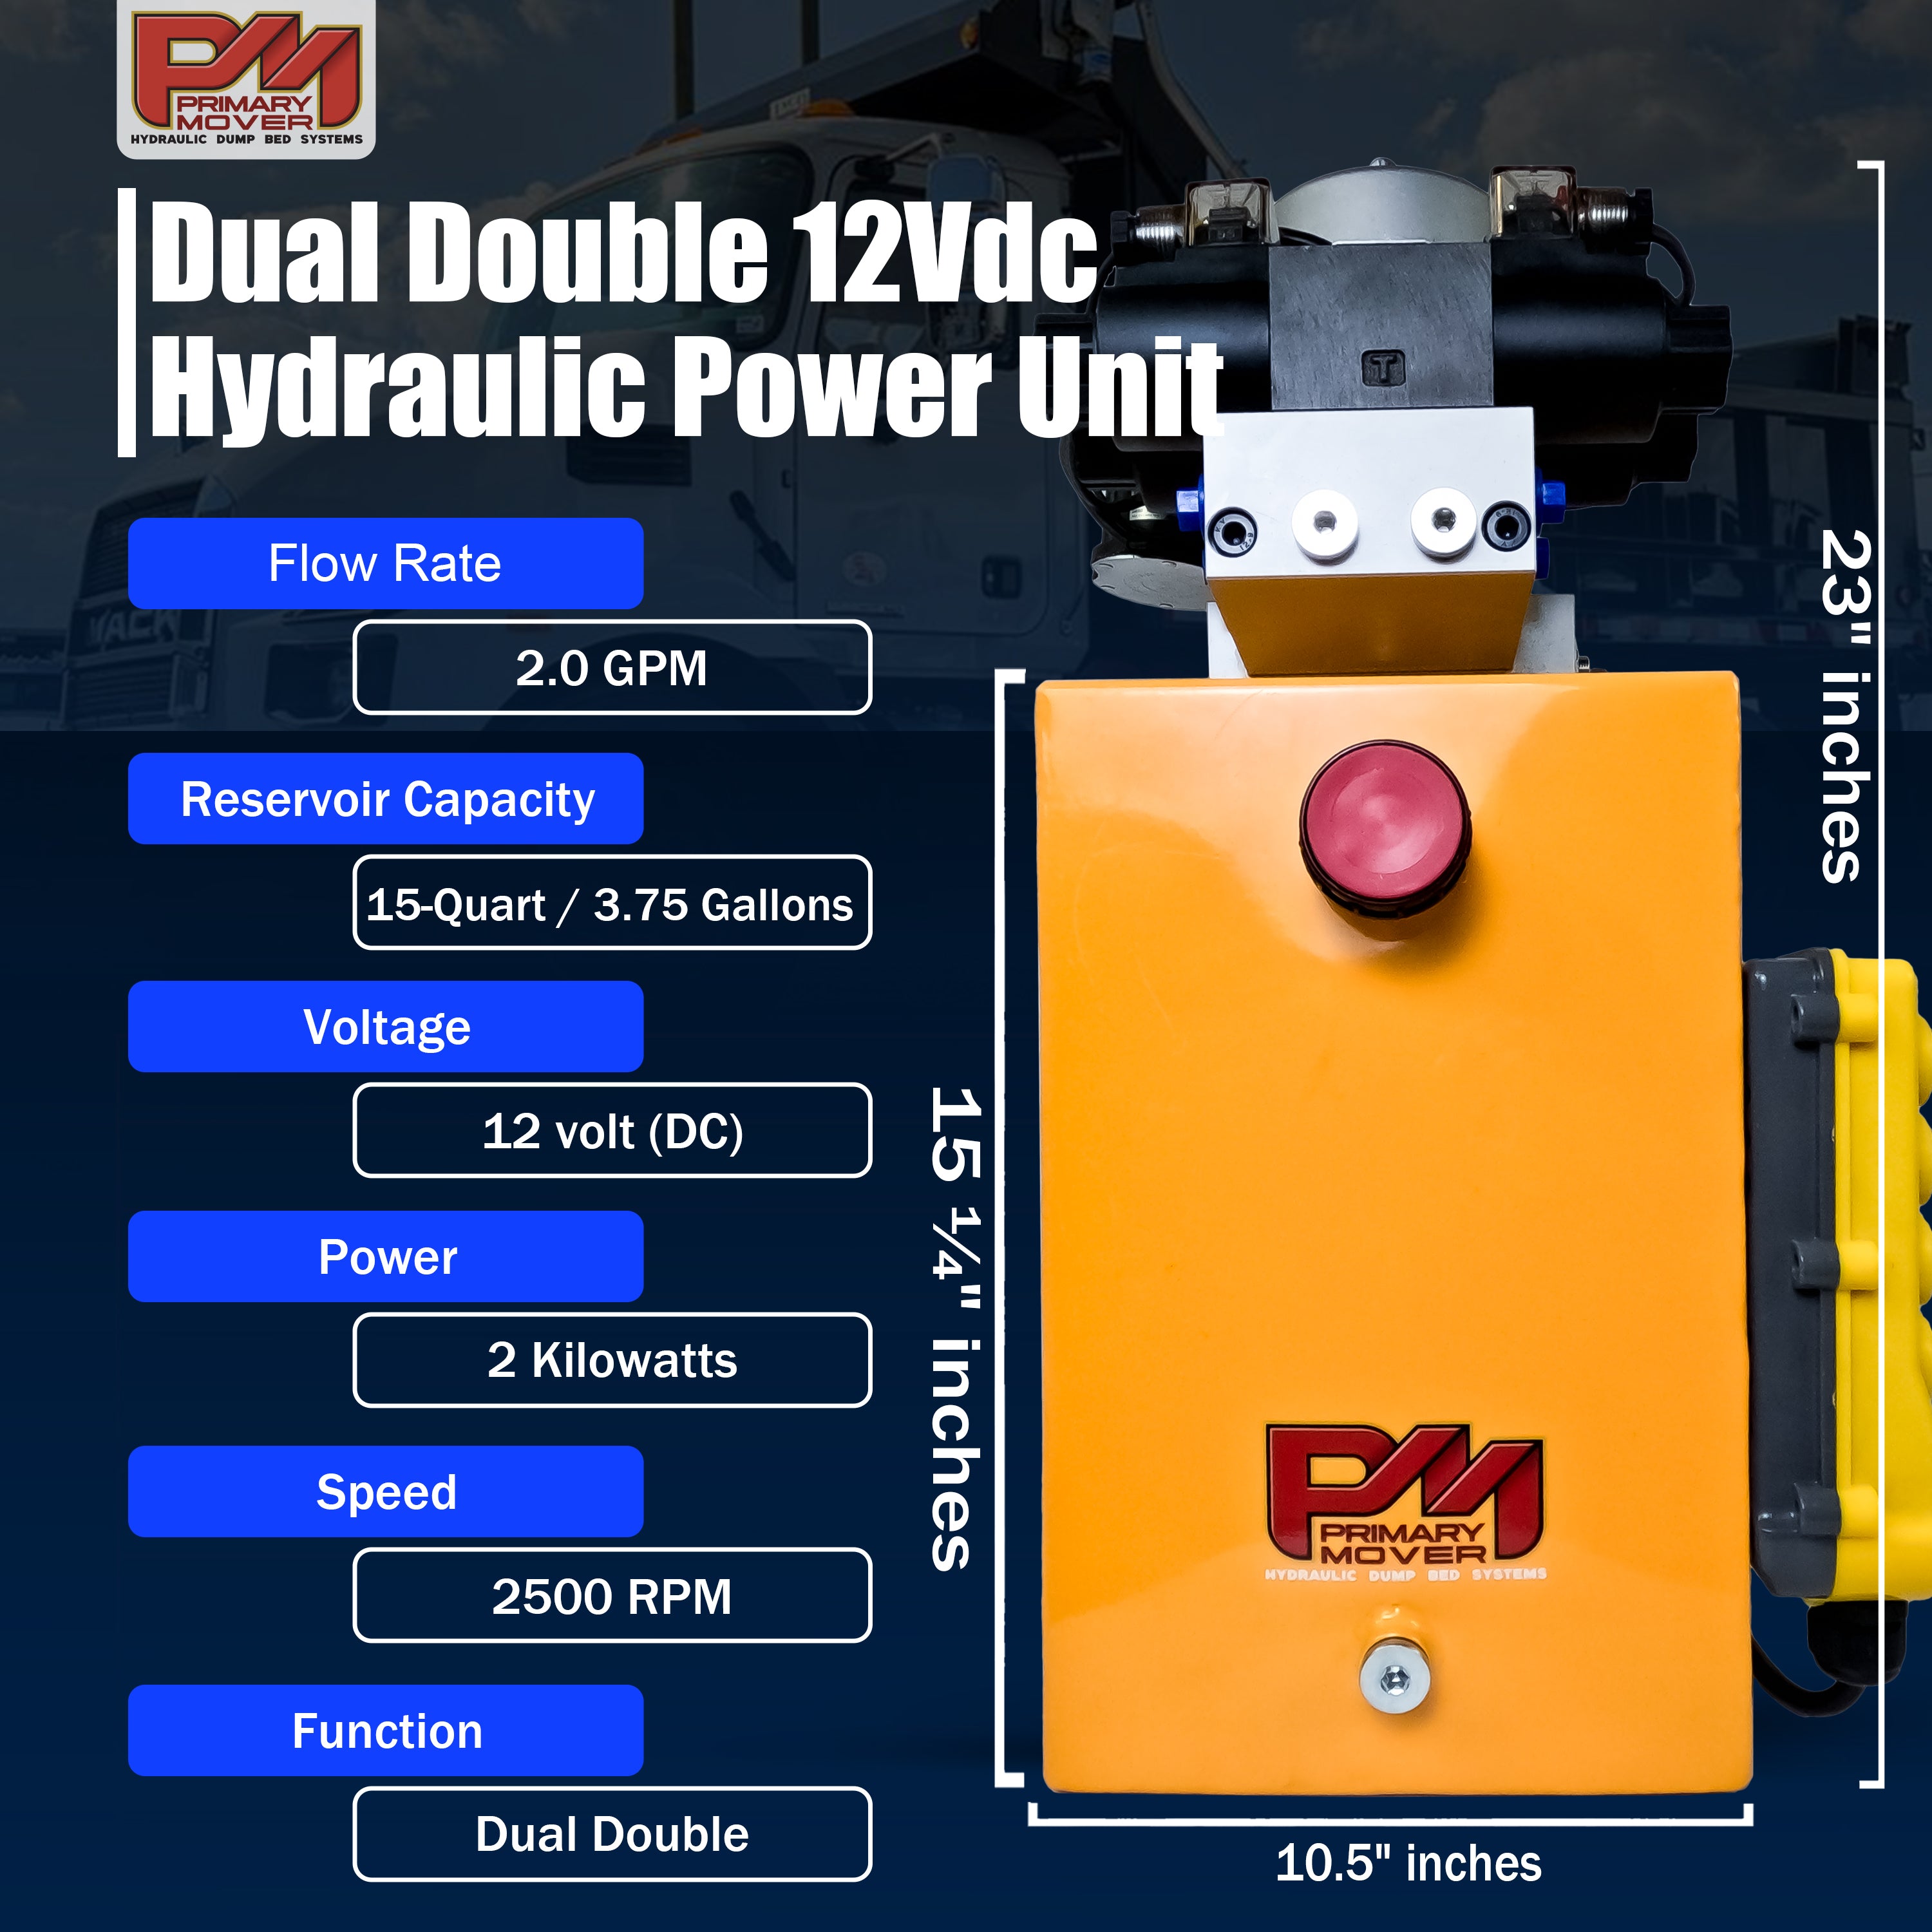 Primary Mover 12V Dual Double-Acting Hydraulic Power Unit: Compact, robust steel construction for dump trailers and trucks, enabling four hydraulic actions simultaneously. Used for any truck or trailer application. 1/2 ton truck dump bed kit.